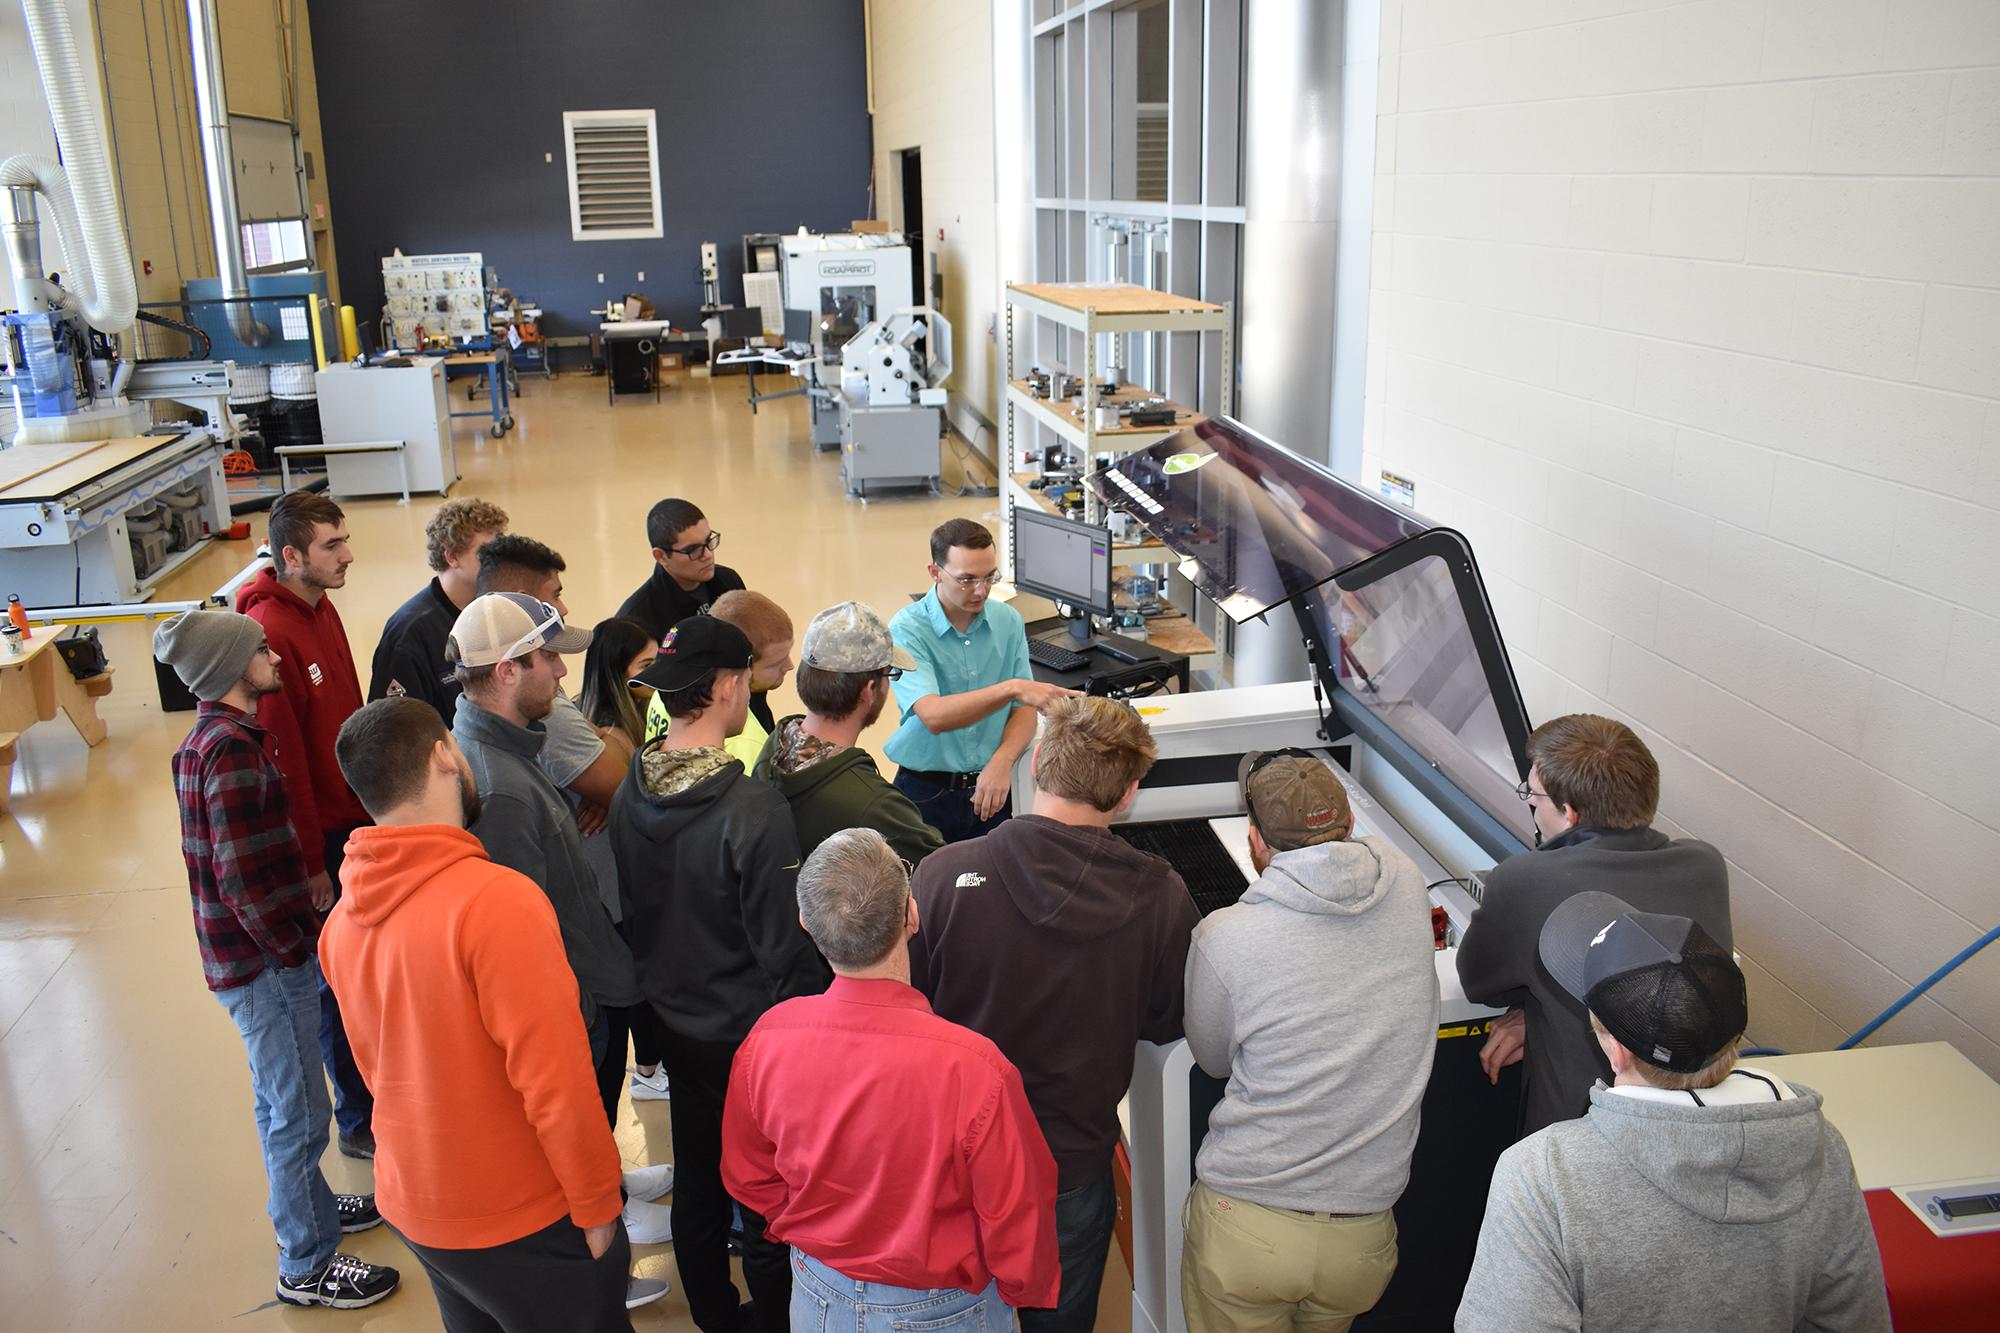 A Jasper professor giving a tour of the Technology Center to some students